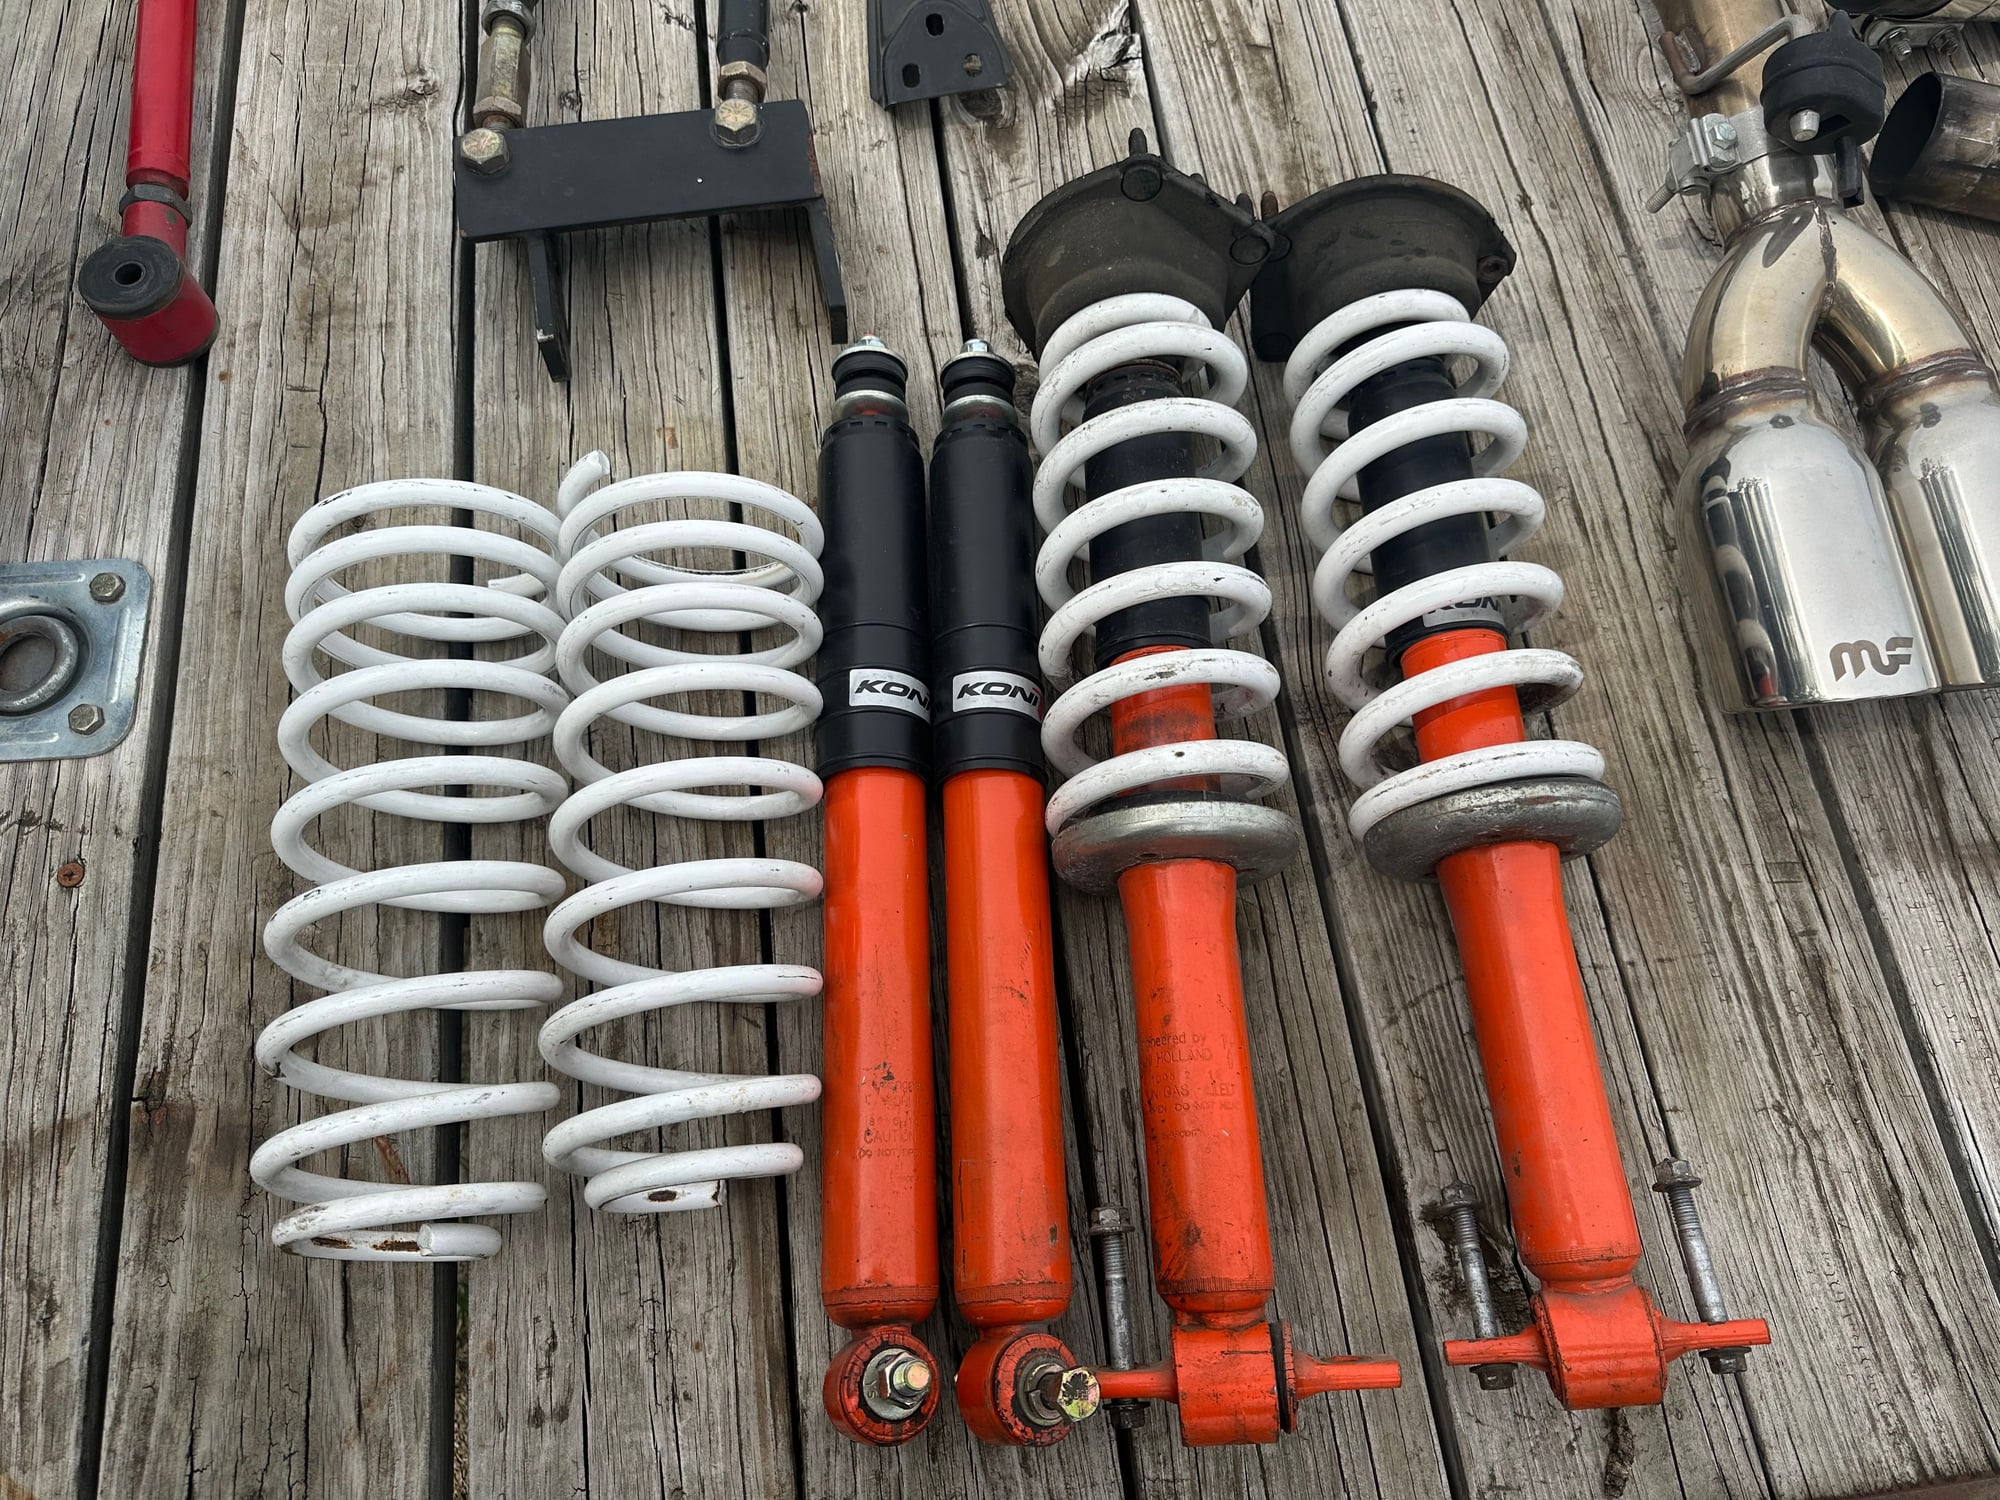 Steering/Suspension - Koni str shocks and strano springs *assembled - Used - 0  All Models - Justin, TX 76247, United States